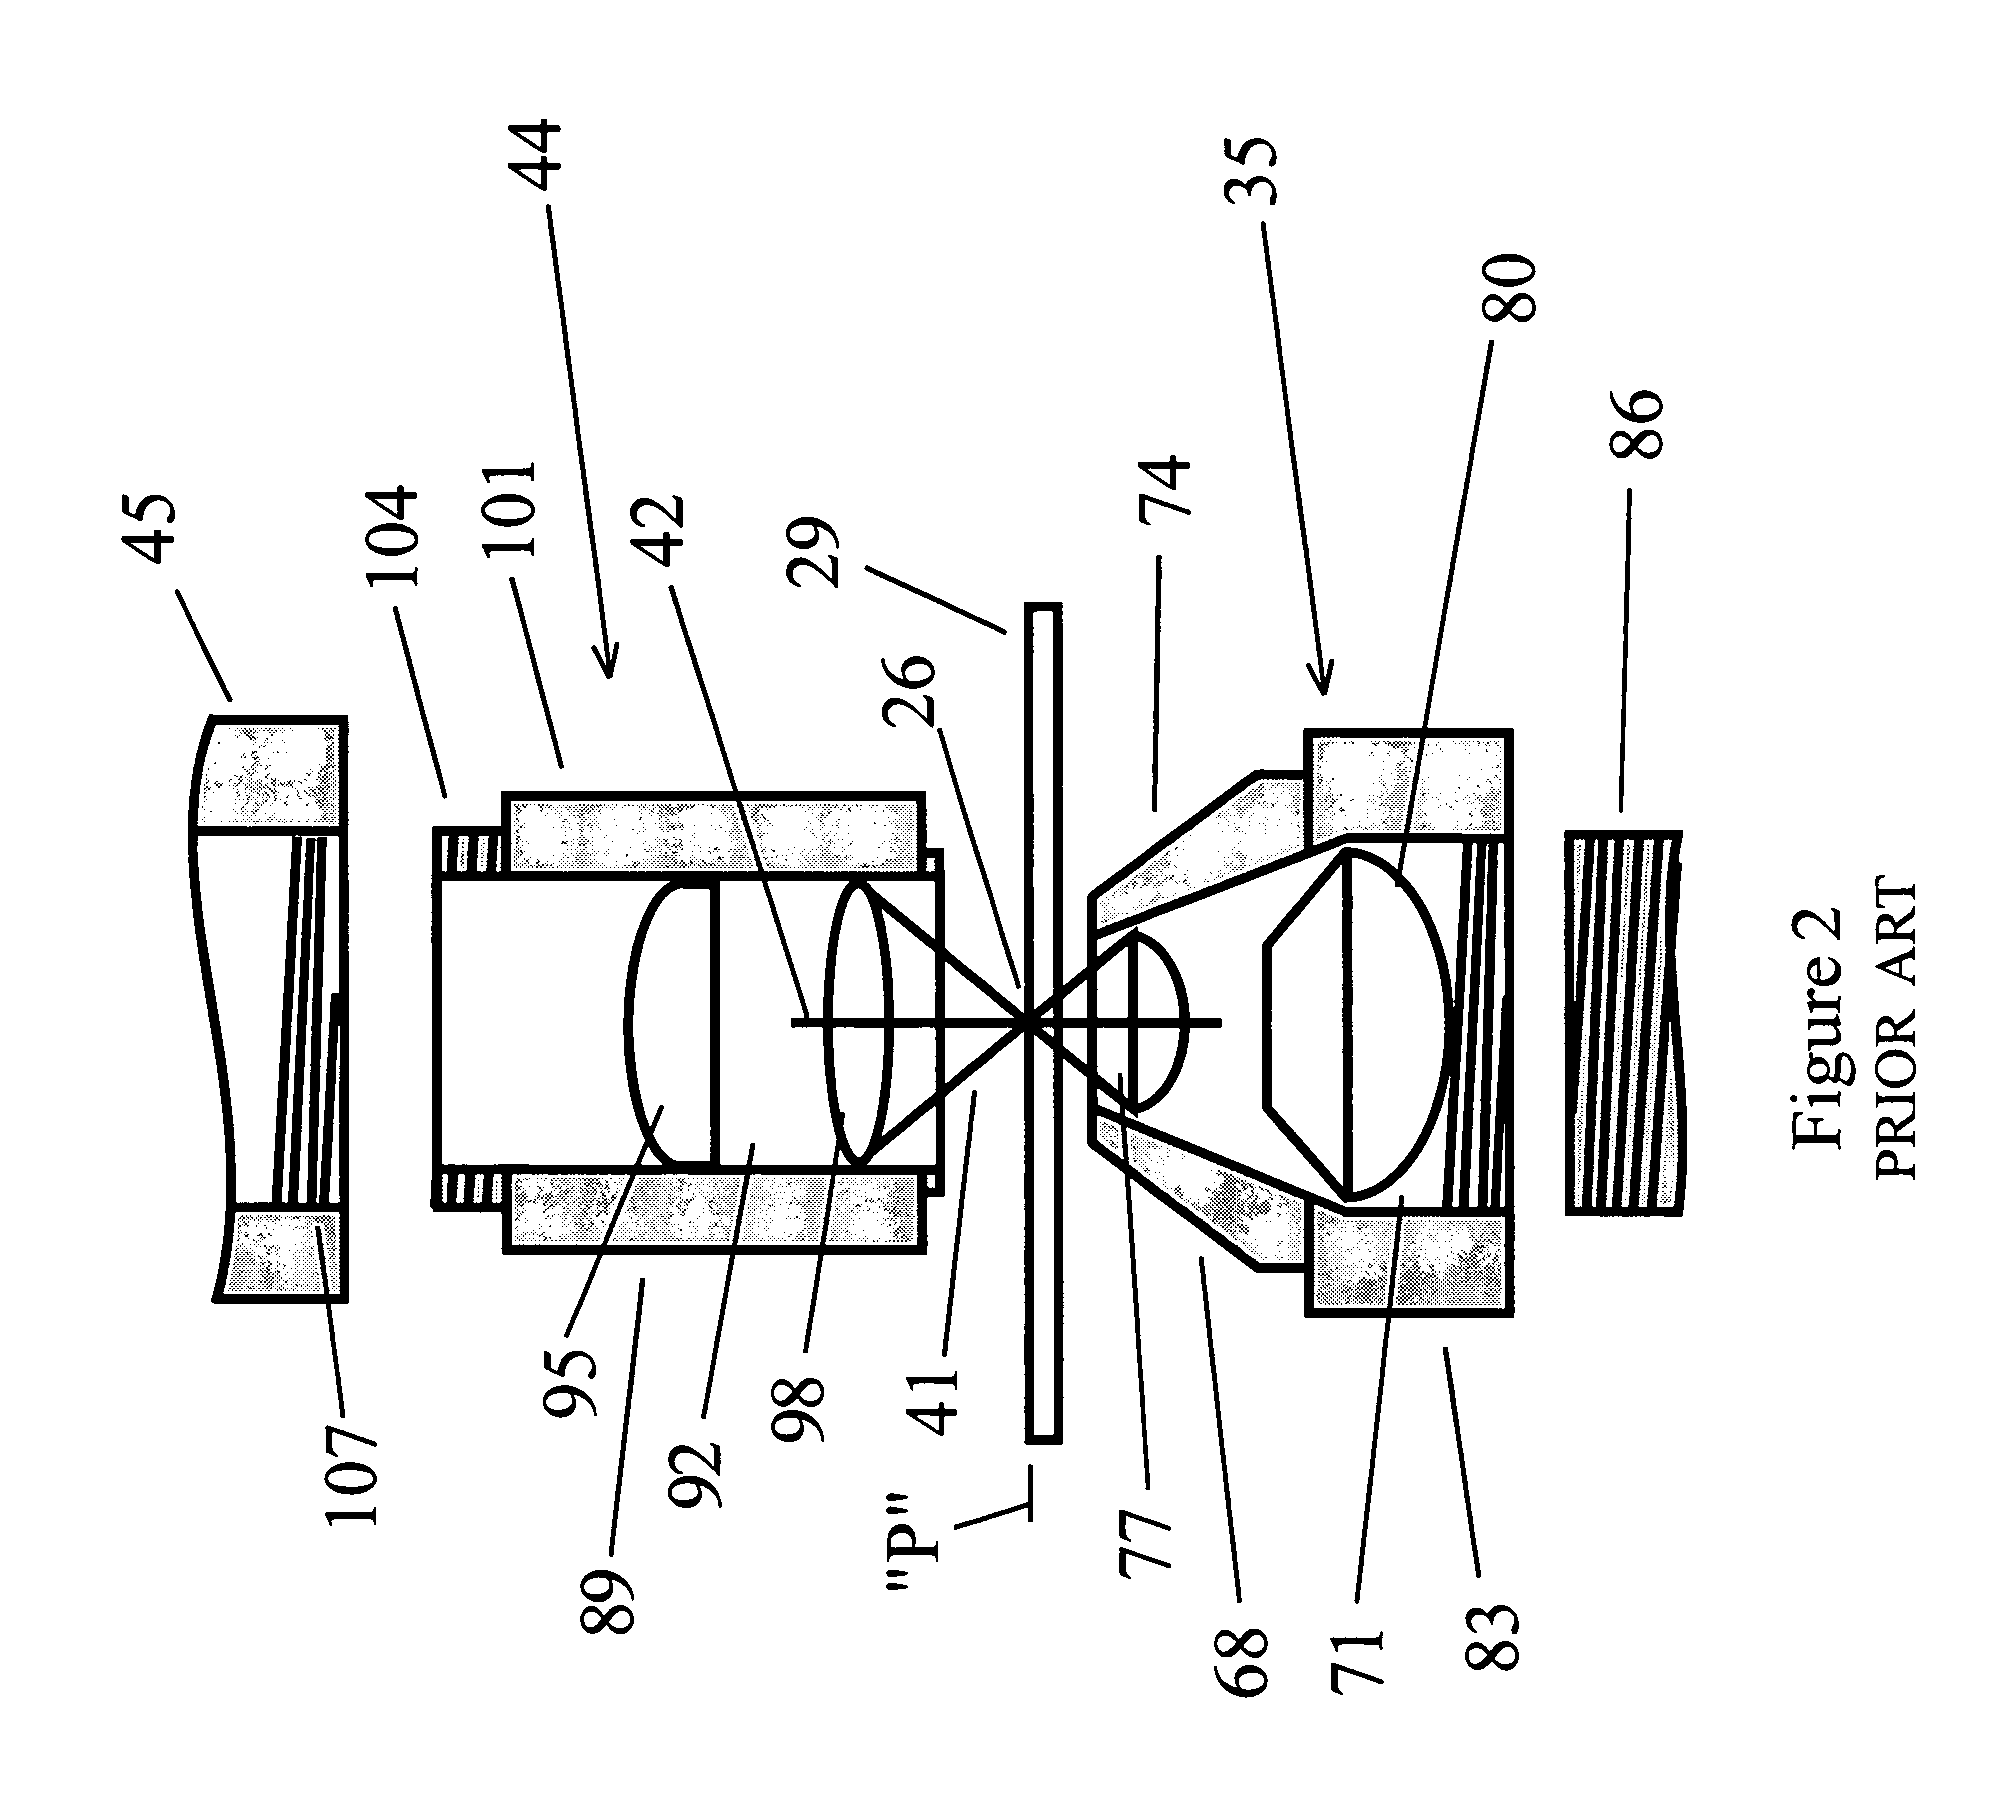 Light diffuser for optical microscopes replacing condenser with opal glass to produce near-koehler illumination